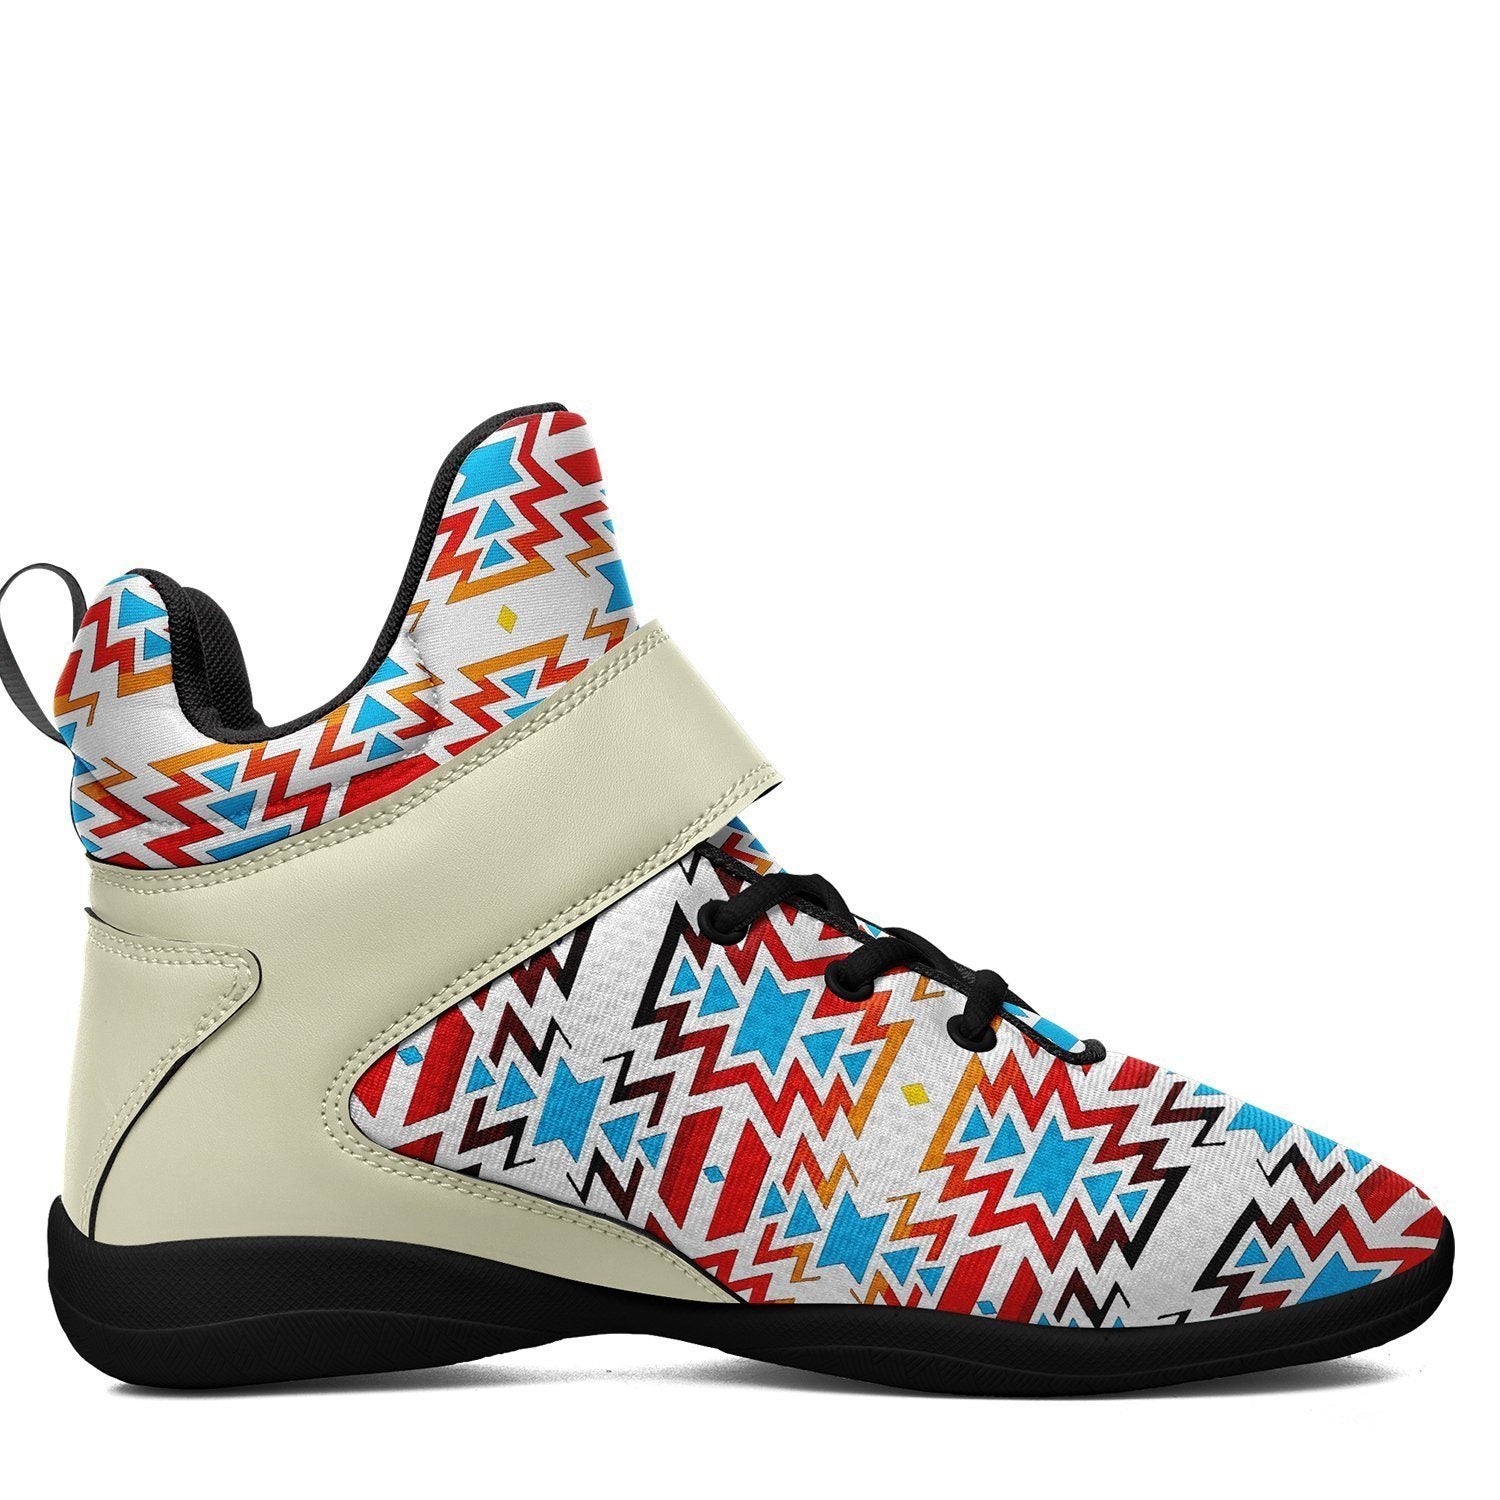 Fire Colors and Sky Kid's Ipottaa Basketball / Sport High Top Shoes 49 Dzine 